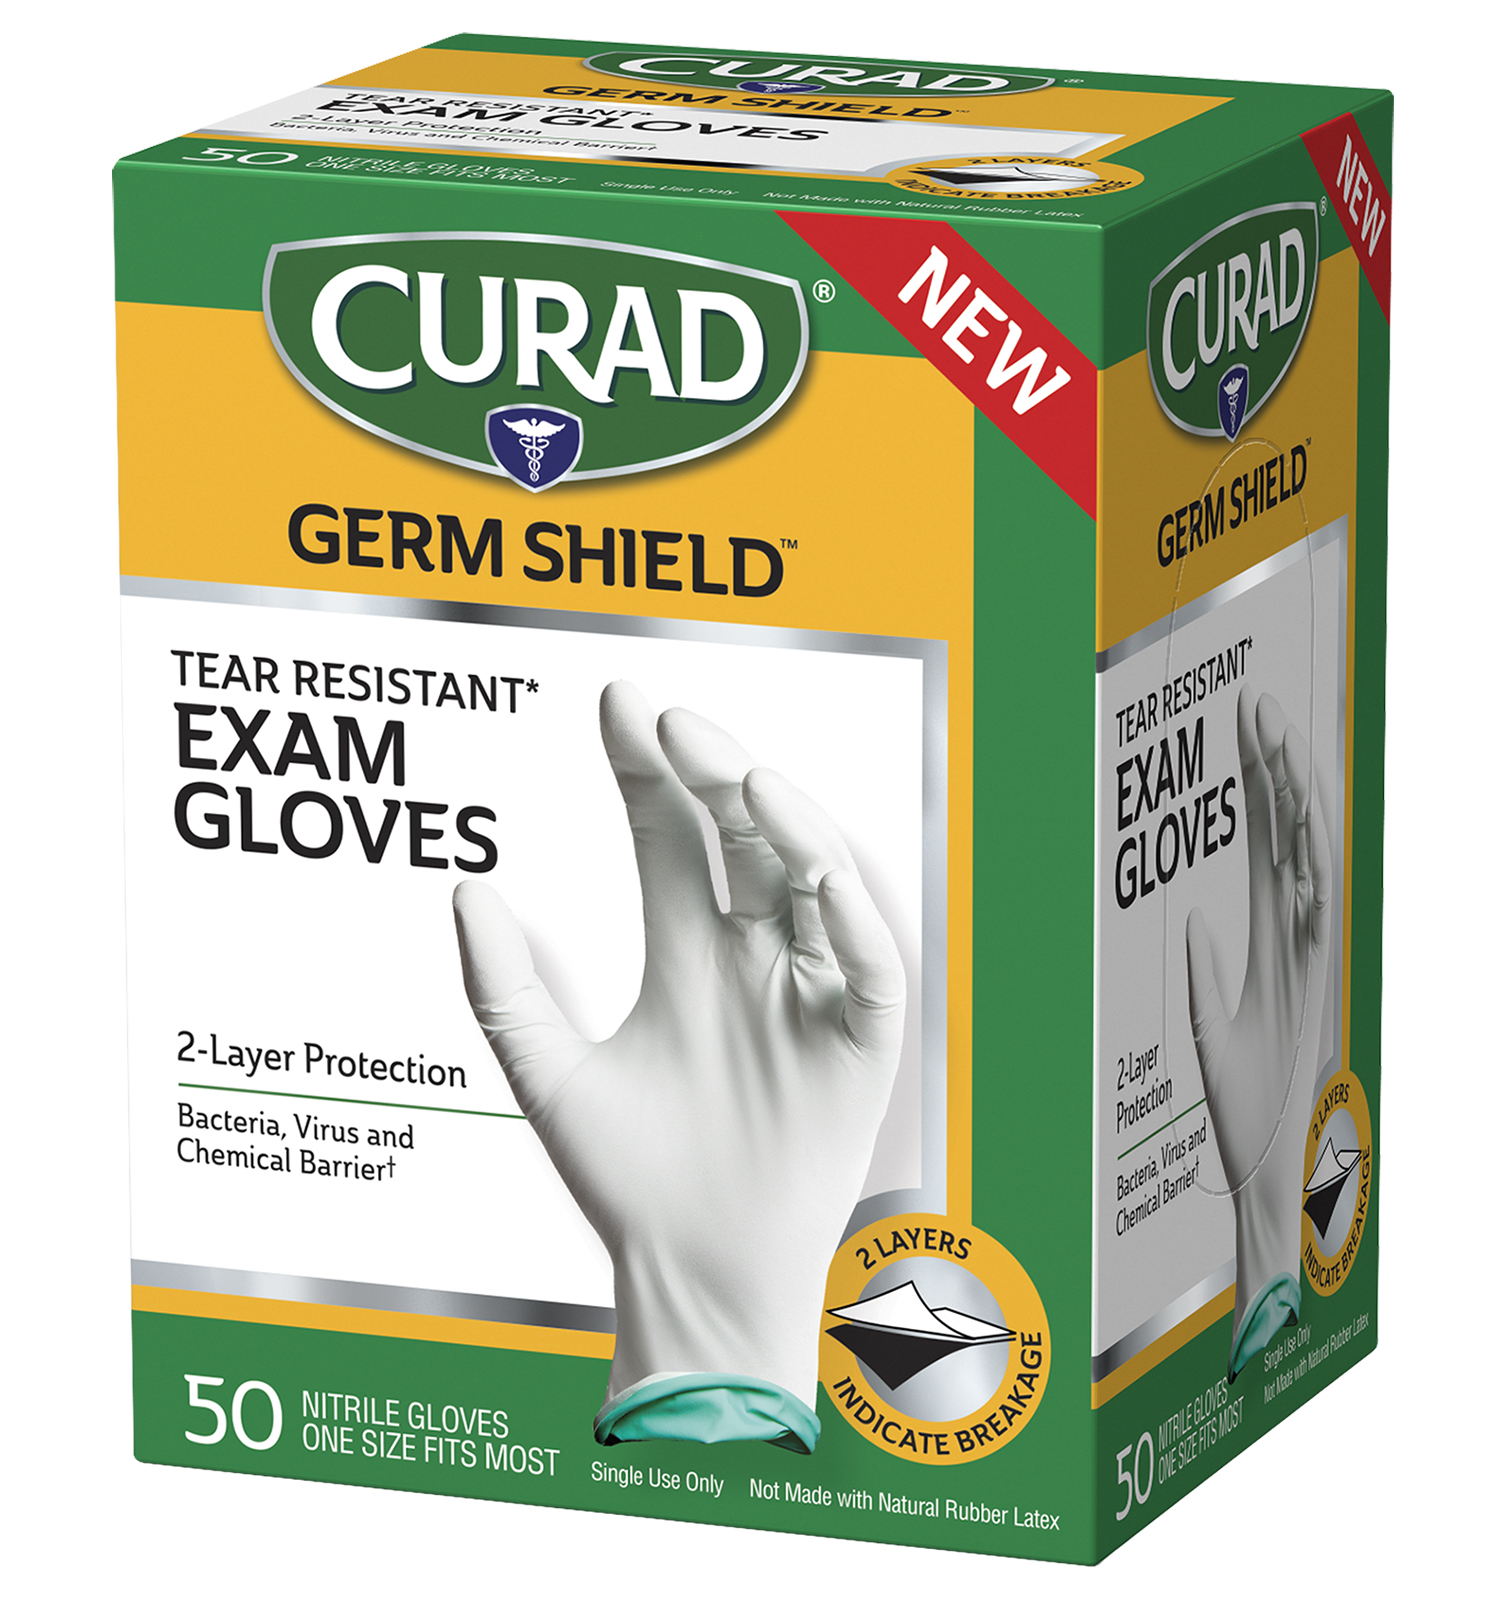 Germ Shield Tear Resistant Exam Gloves, One Size Fits Most, 50 count